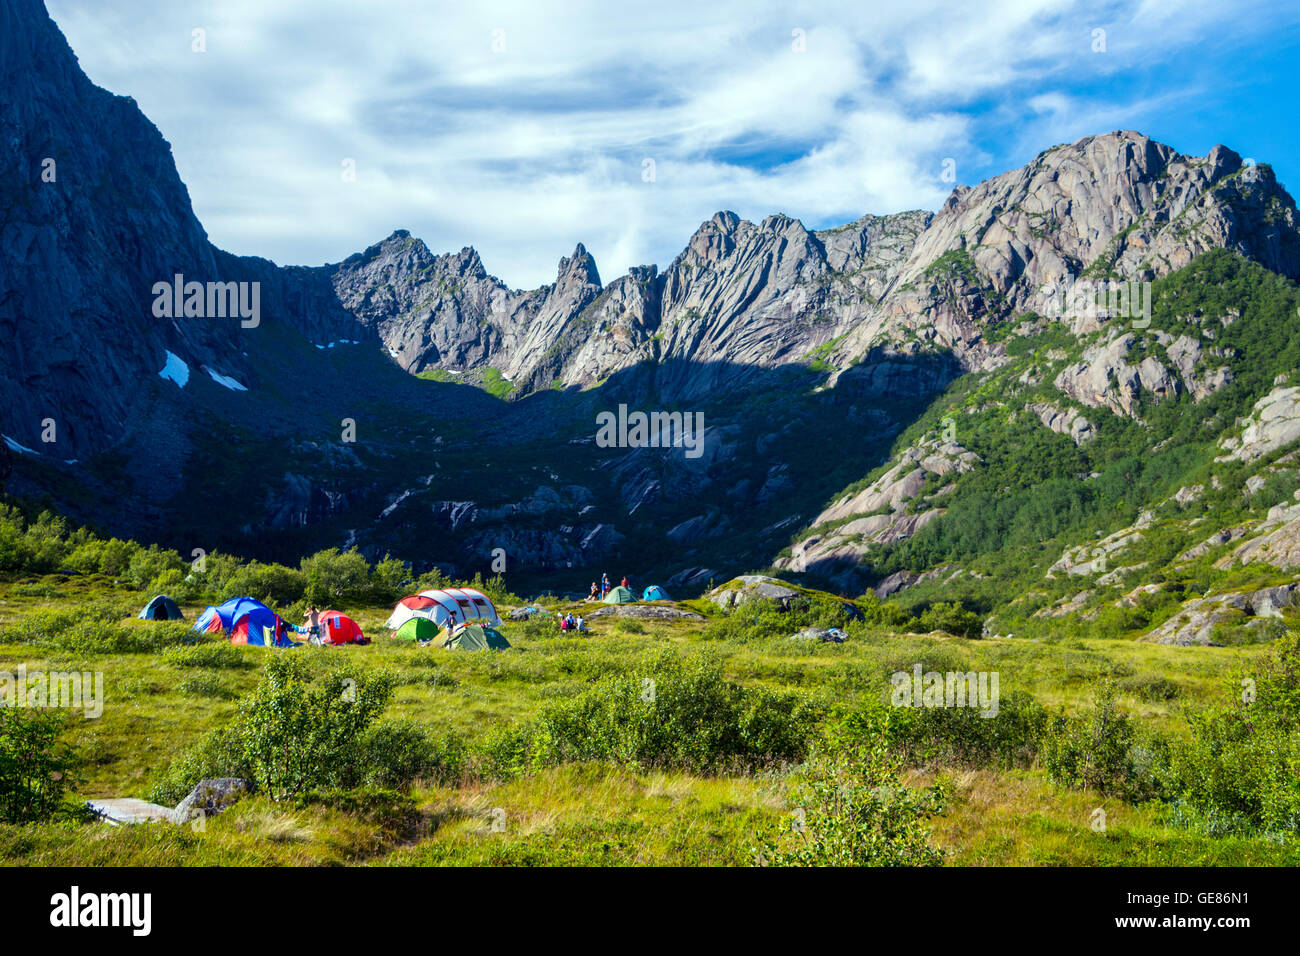 Colorful tents, wild camping group in mountains, Lofoten, Arctic Norway Stock Photo